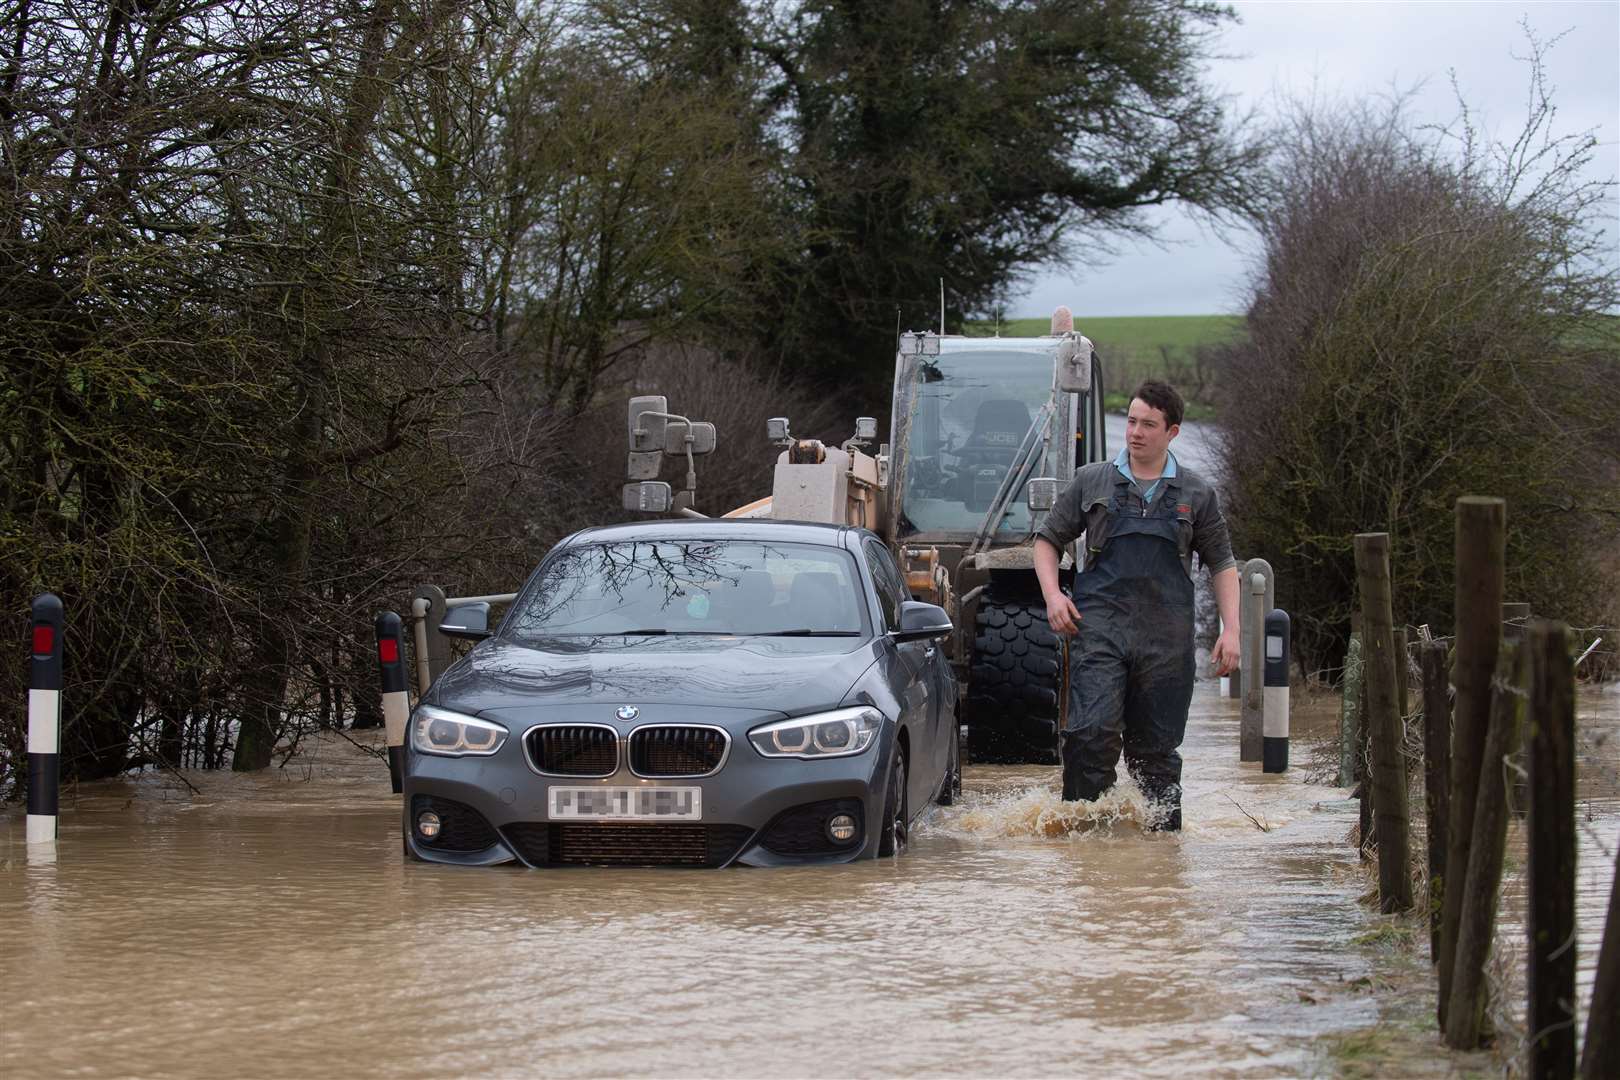 A local farmer helps rescue a stranded motorist from a flood on Hamilton Road in Leicester (Joe Giddens/PA)